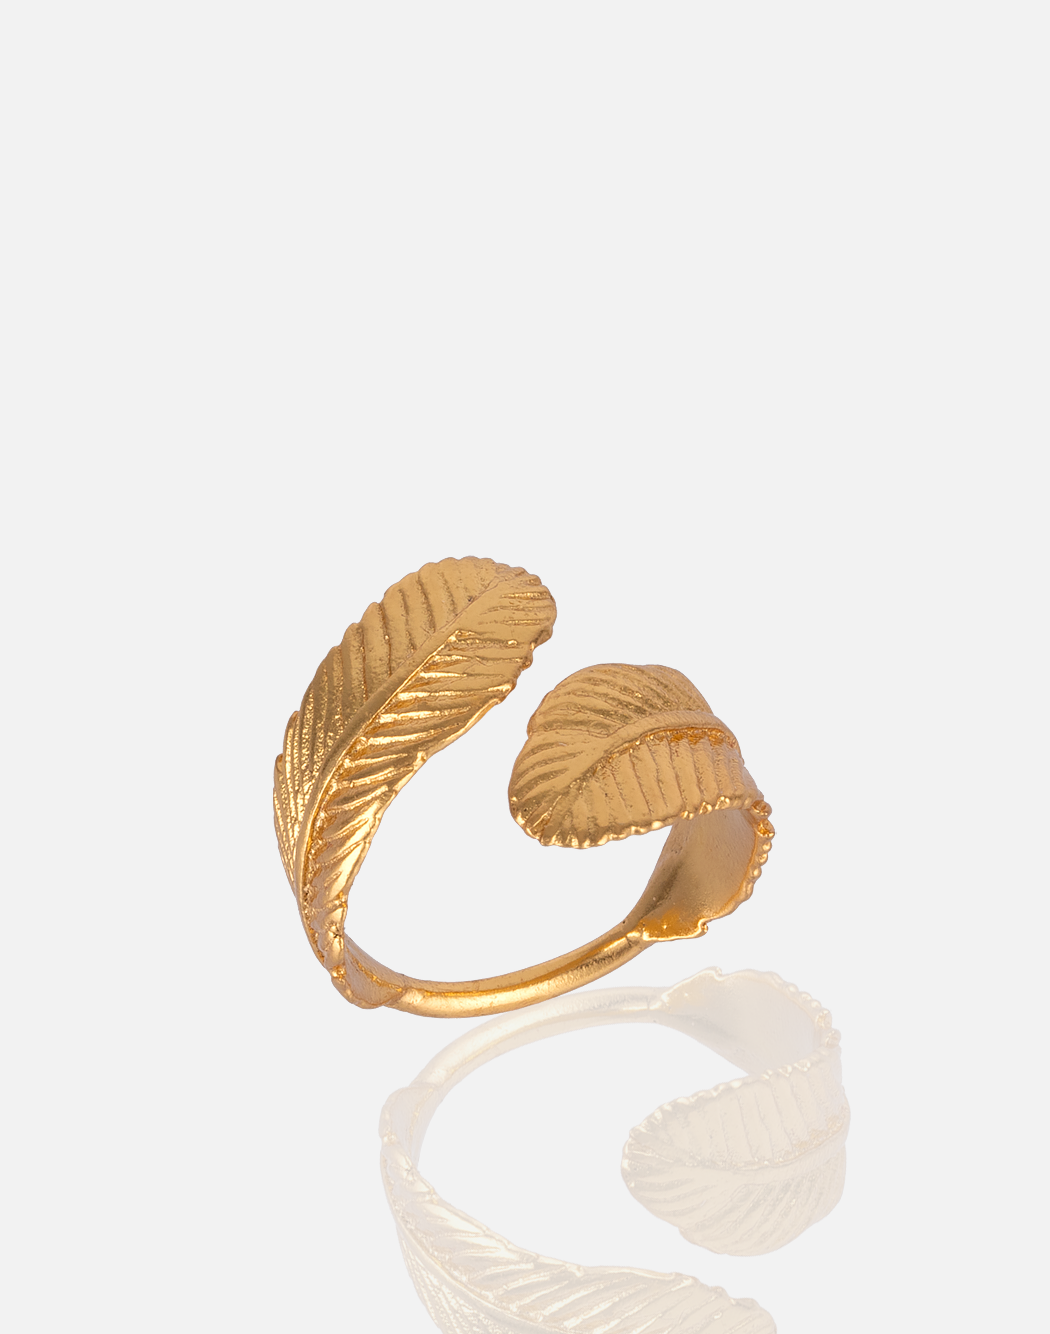 Women's Gold Feather Ring Design Adjustable handmade at RM Kandy